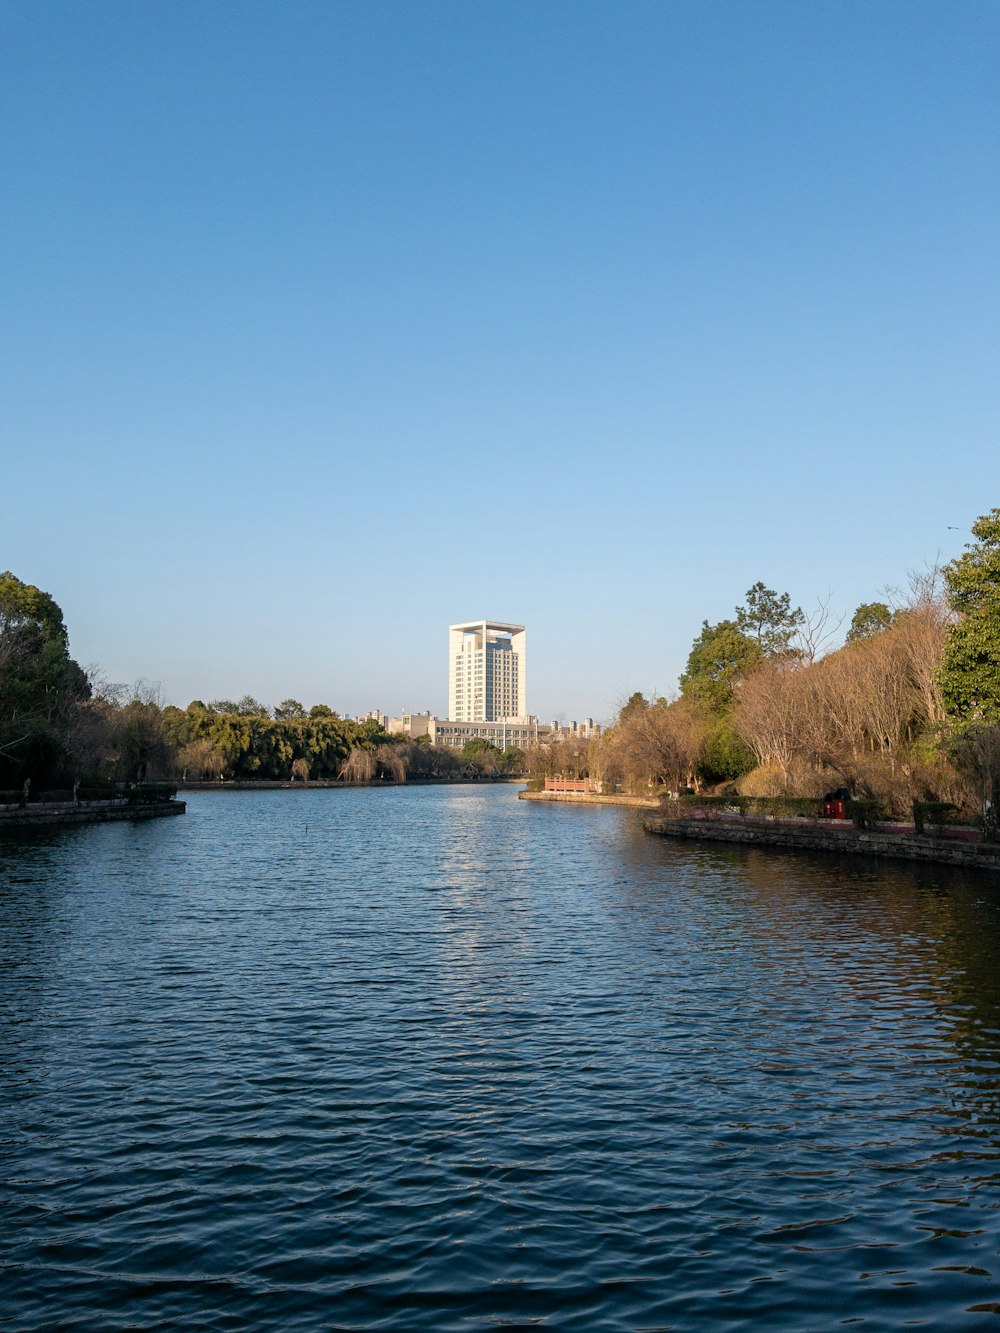 a body of water surrounded by trees and a tall building